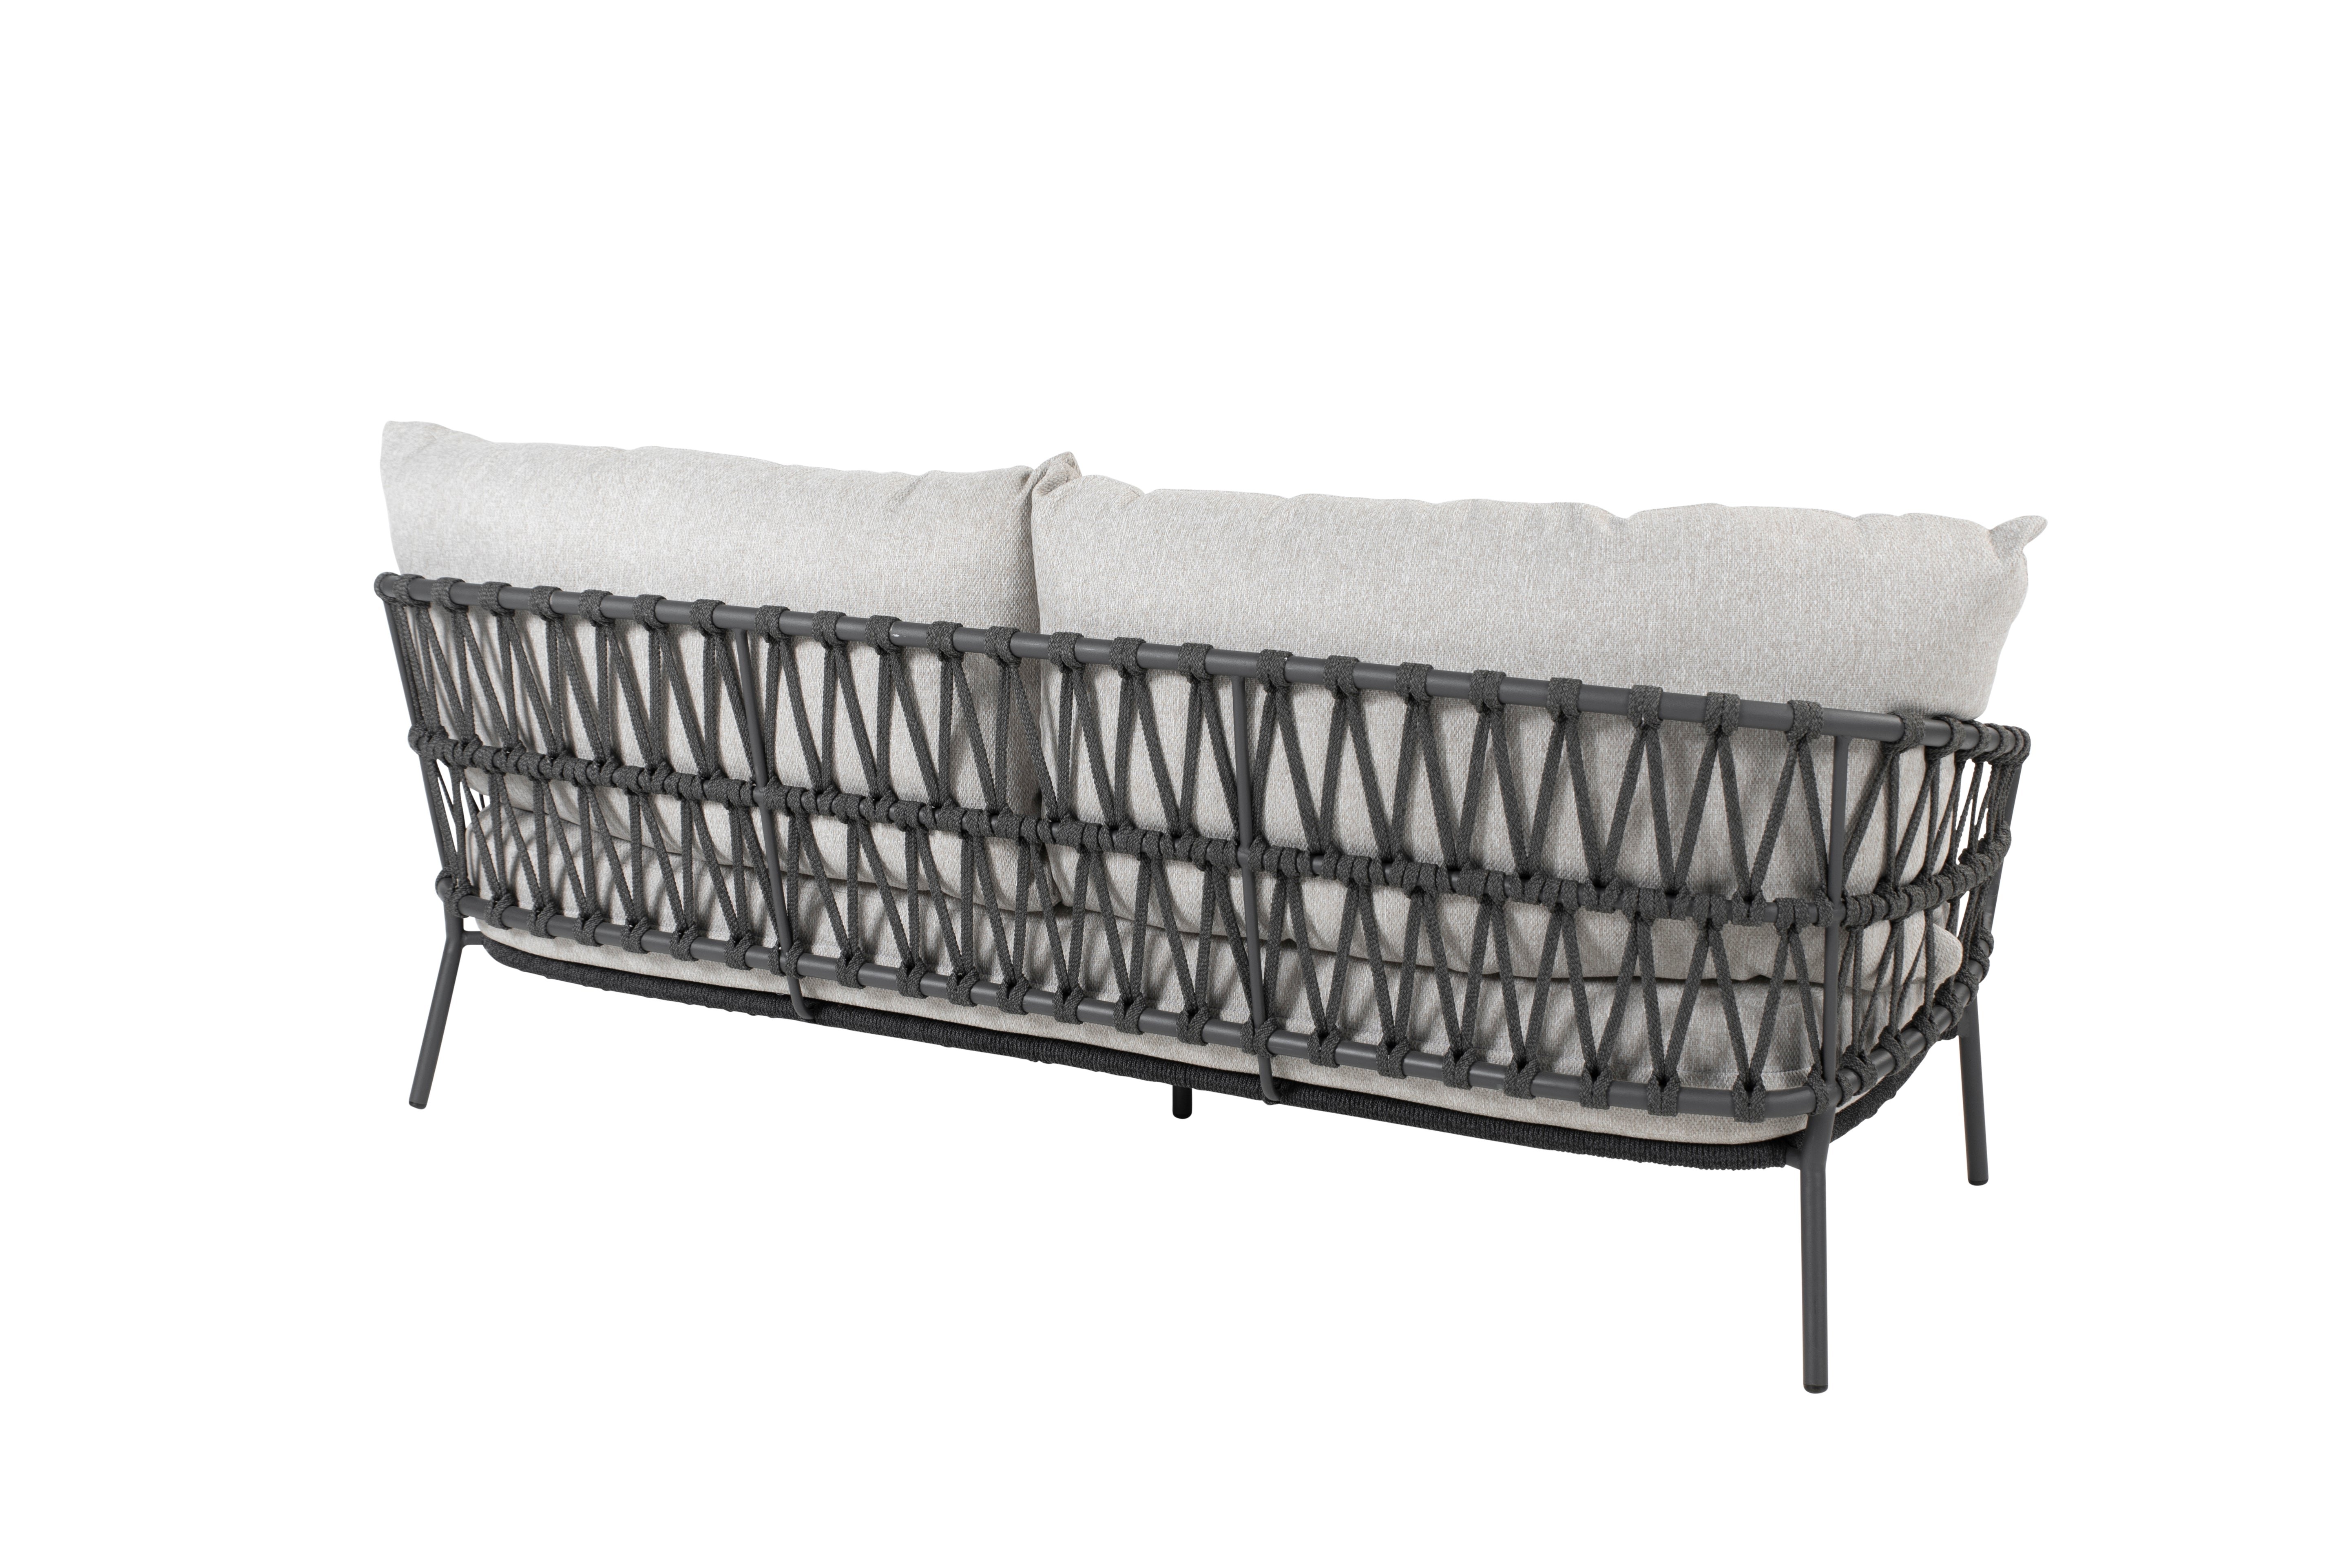 4 Seasons Outdoor Calpi Living Bench 3 Seater With 3 Cushions